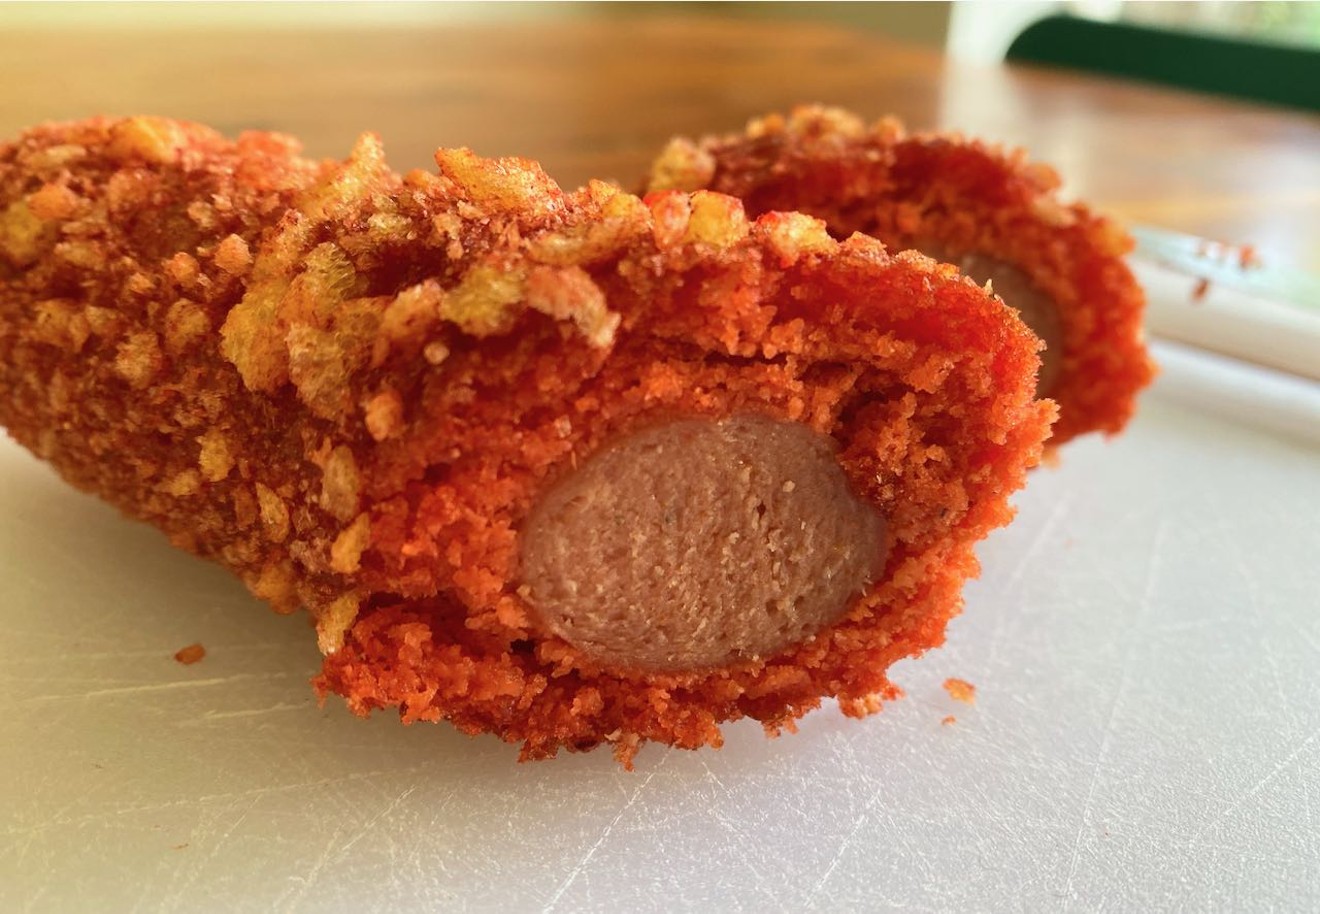 That there, Clark, is a corn dog made with flamin' hot Cheetos.